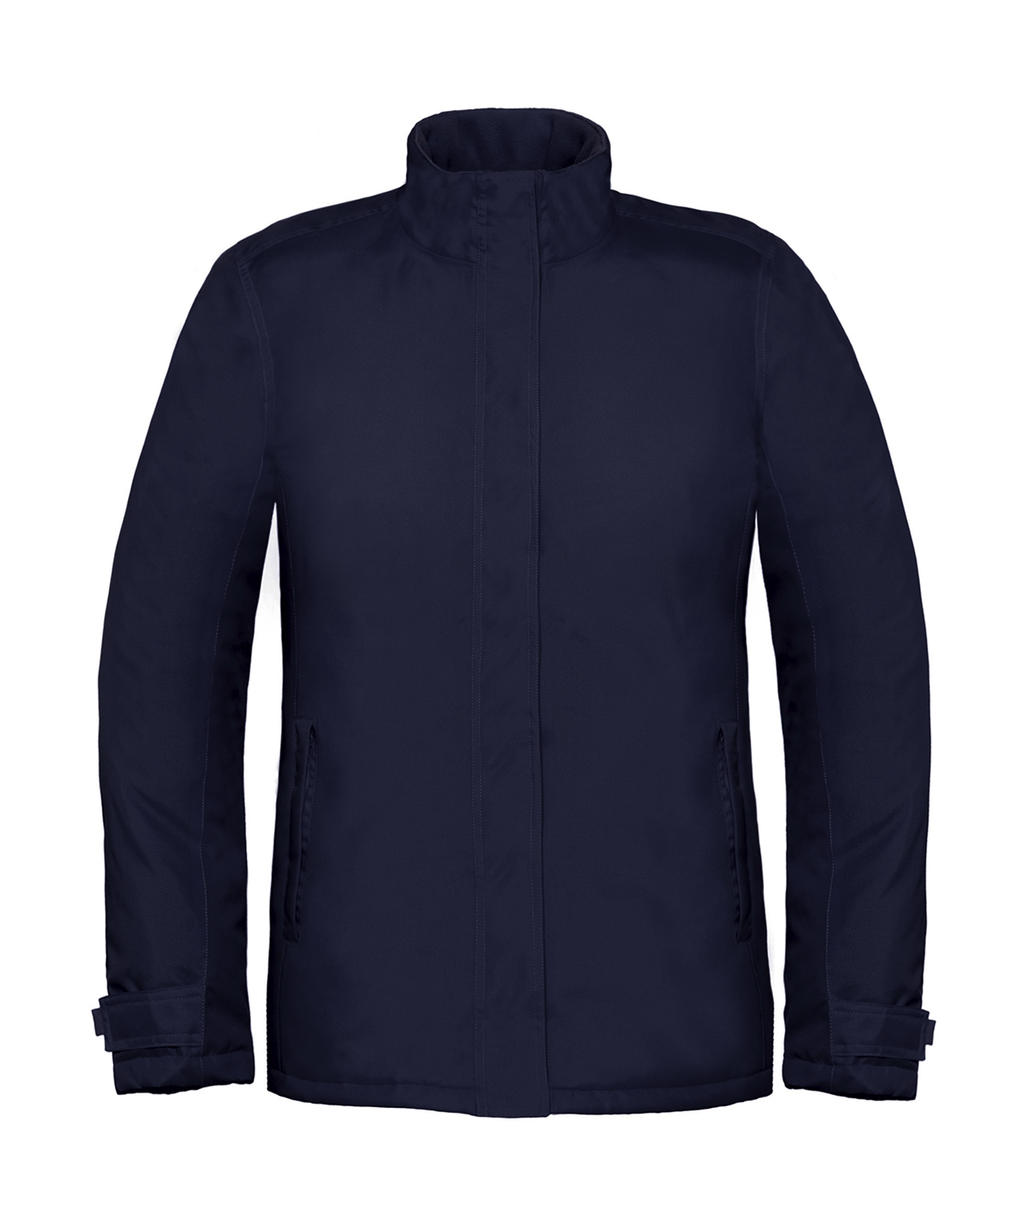  Real+/women Heavy Weight Jacket in Farbe Navy